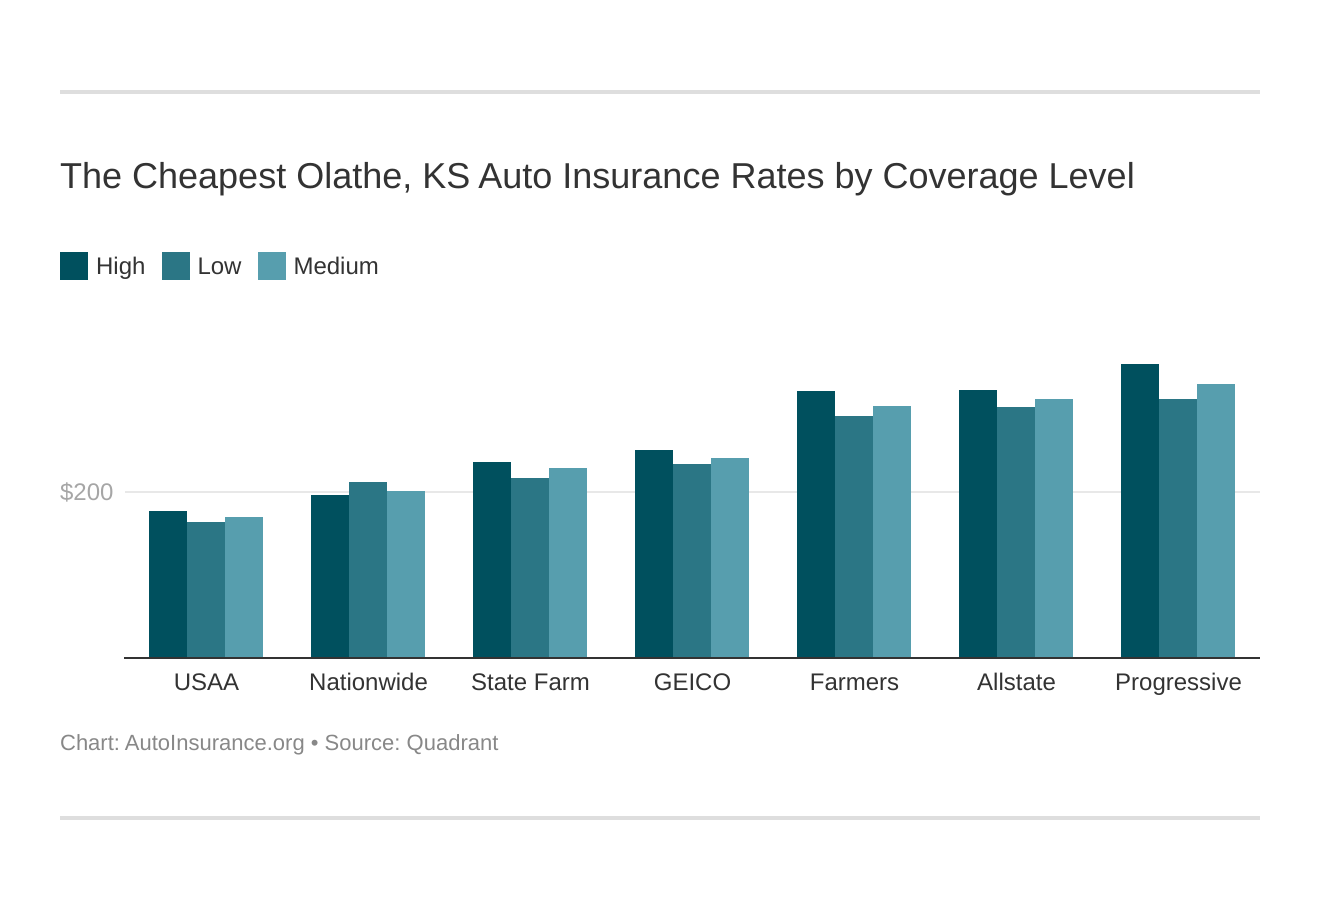 The Cheapest Olathe, KS Auto Insurance Rates by Coverage Level